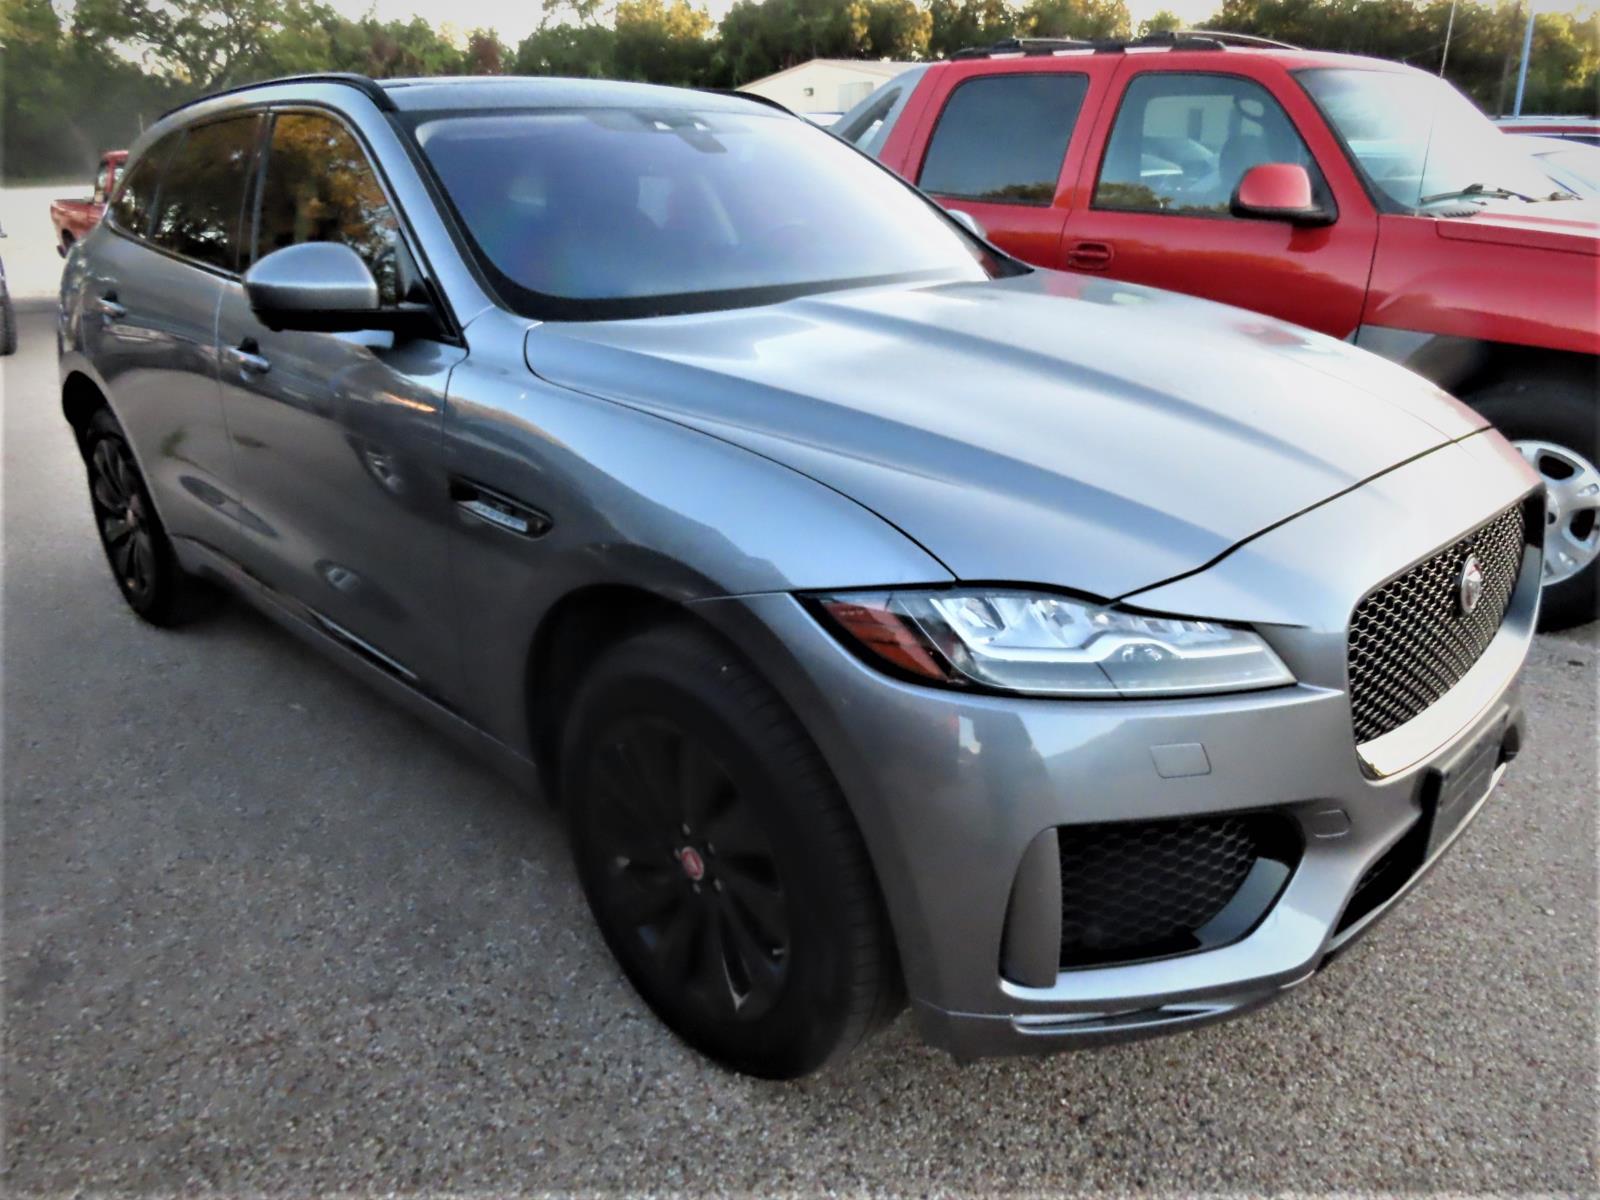 2020 Jaguar F-PACE 25t Checkered Flag Limited Edition